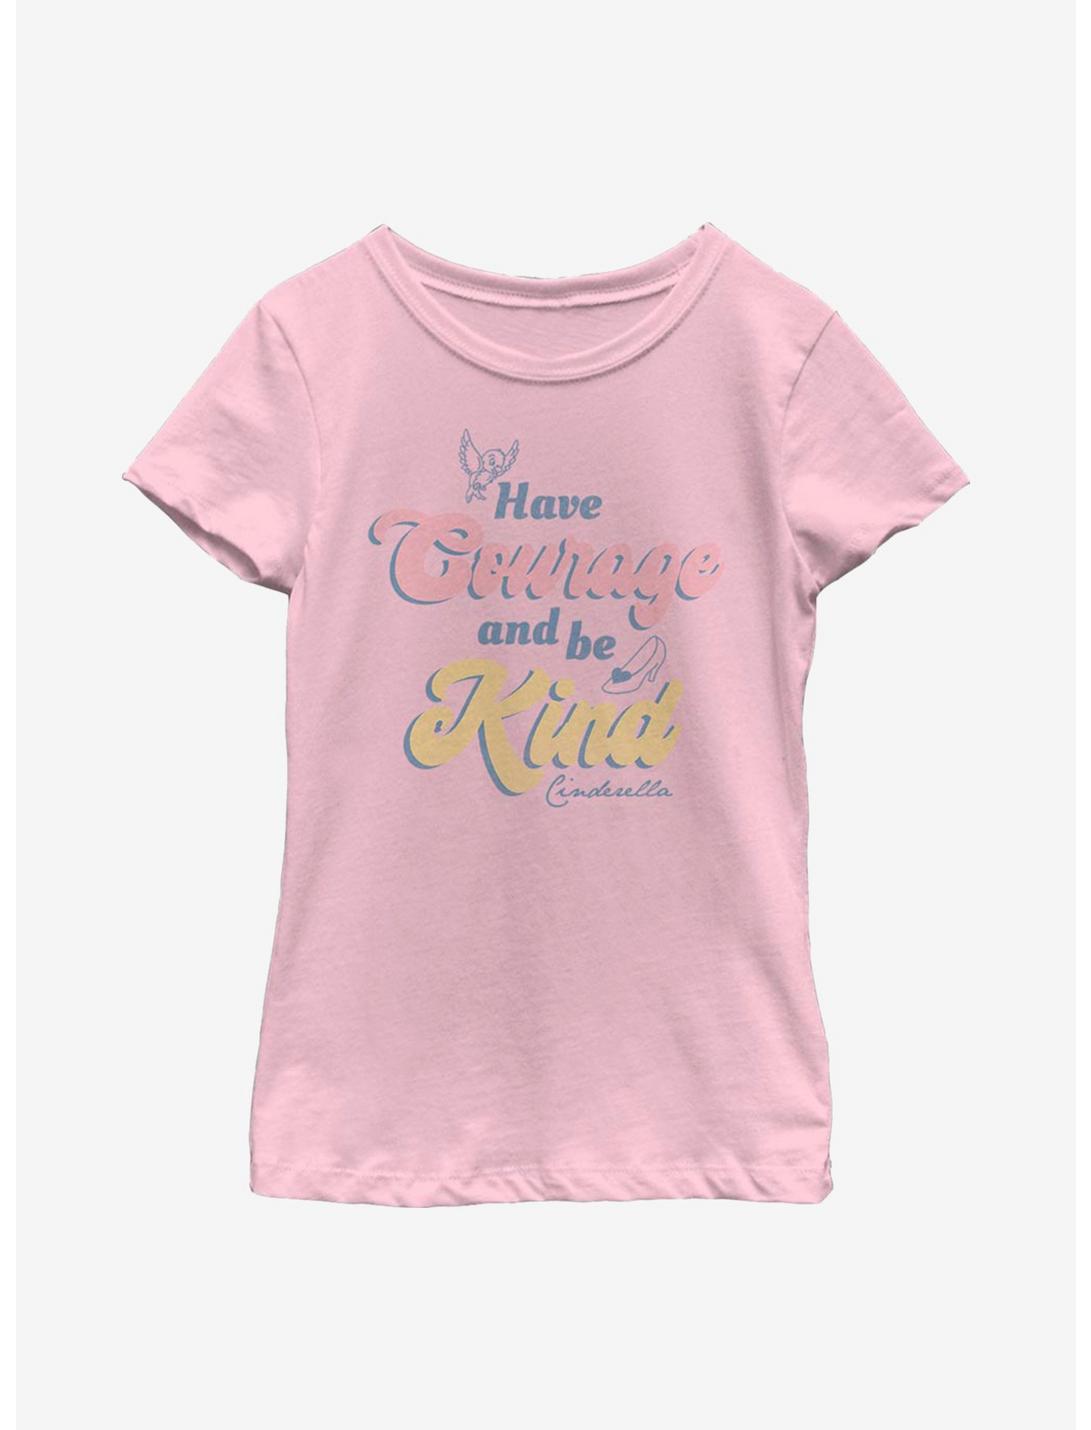 Disney Cinderella Courage And Kindness Youth Girls T-Shirt, PINK, hi-res